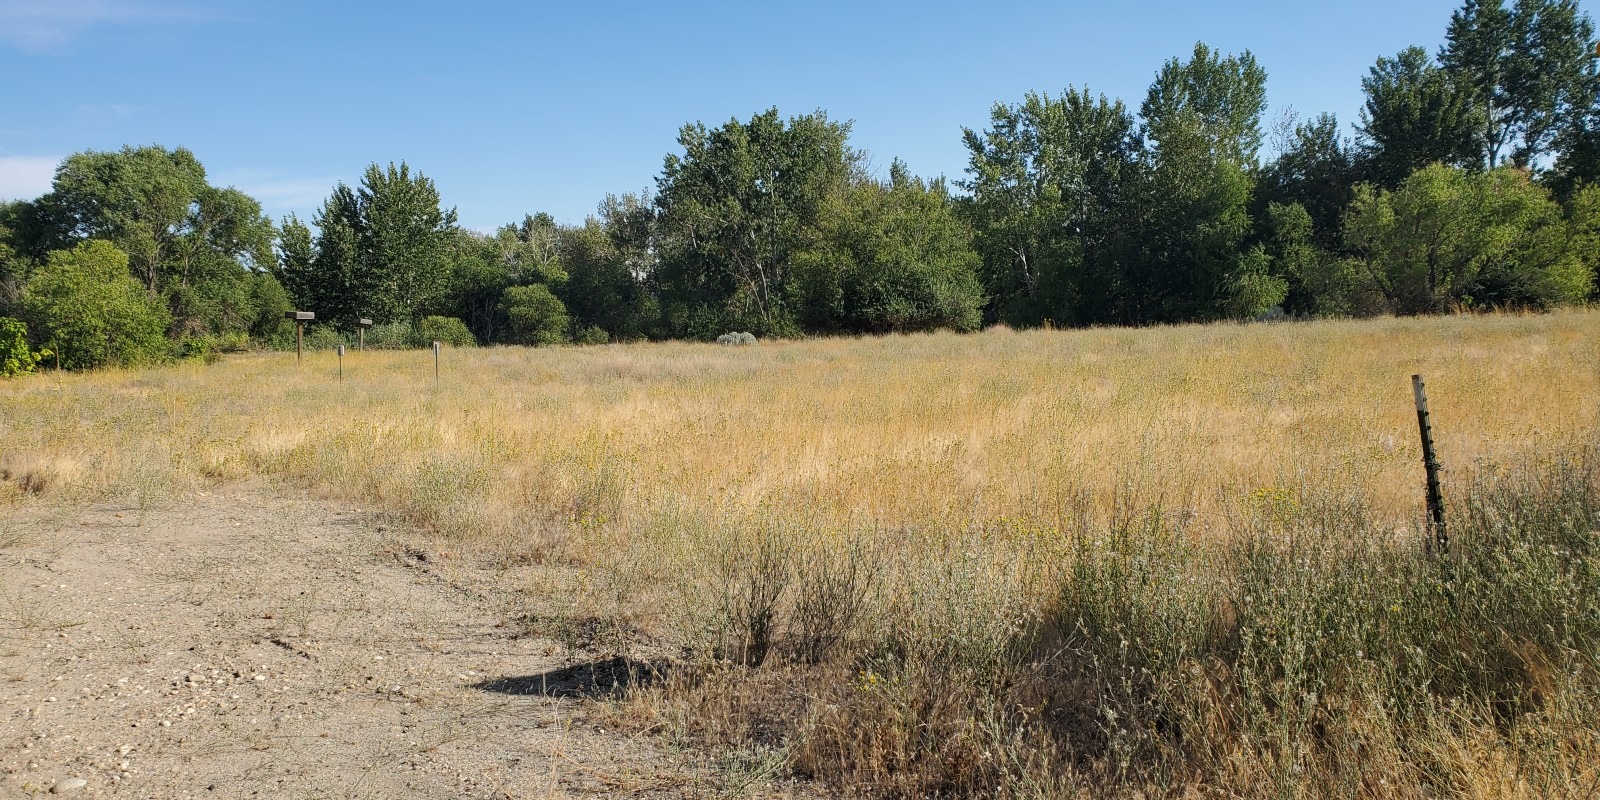 The plot of land is located at 5657 E. Warm Springs Ave., Boise